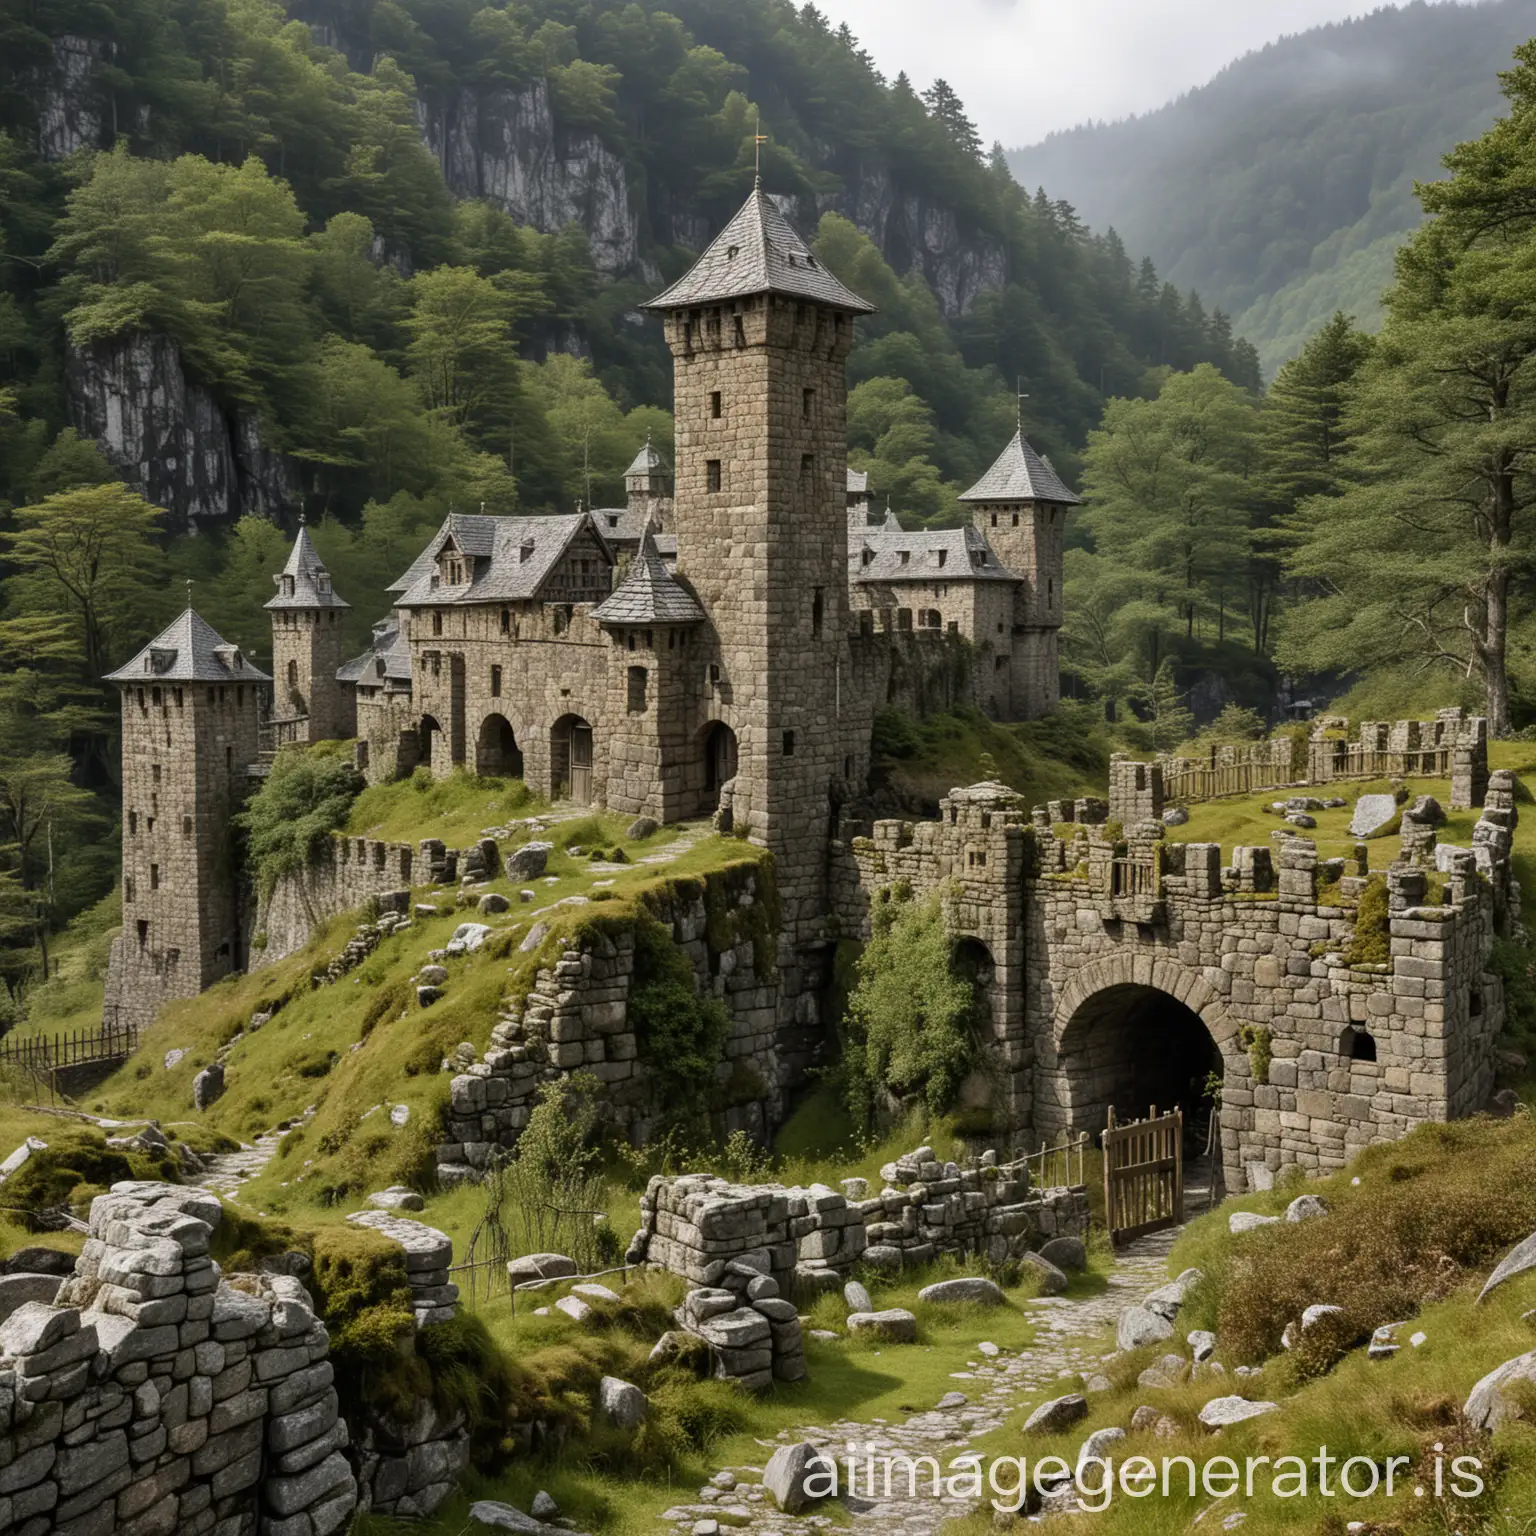 a stone fortress tucked in the mountains. it has three towers, an outer wall, and wooden gates. a few watchtowers woven together by a large connecting building splattered with lichen and moss. surrounded by a dense forest.